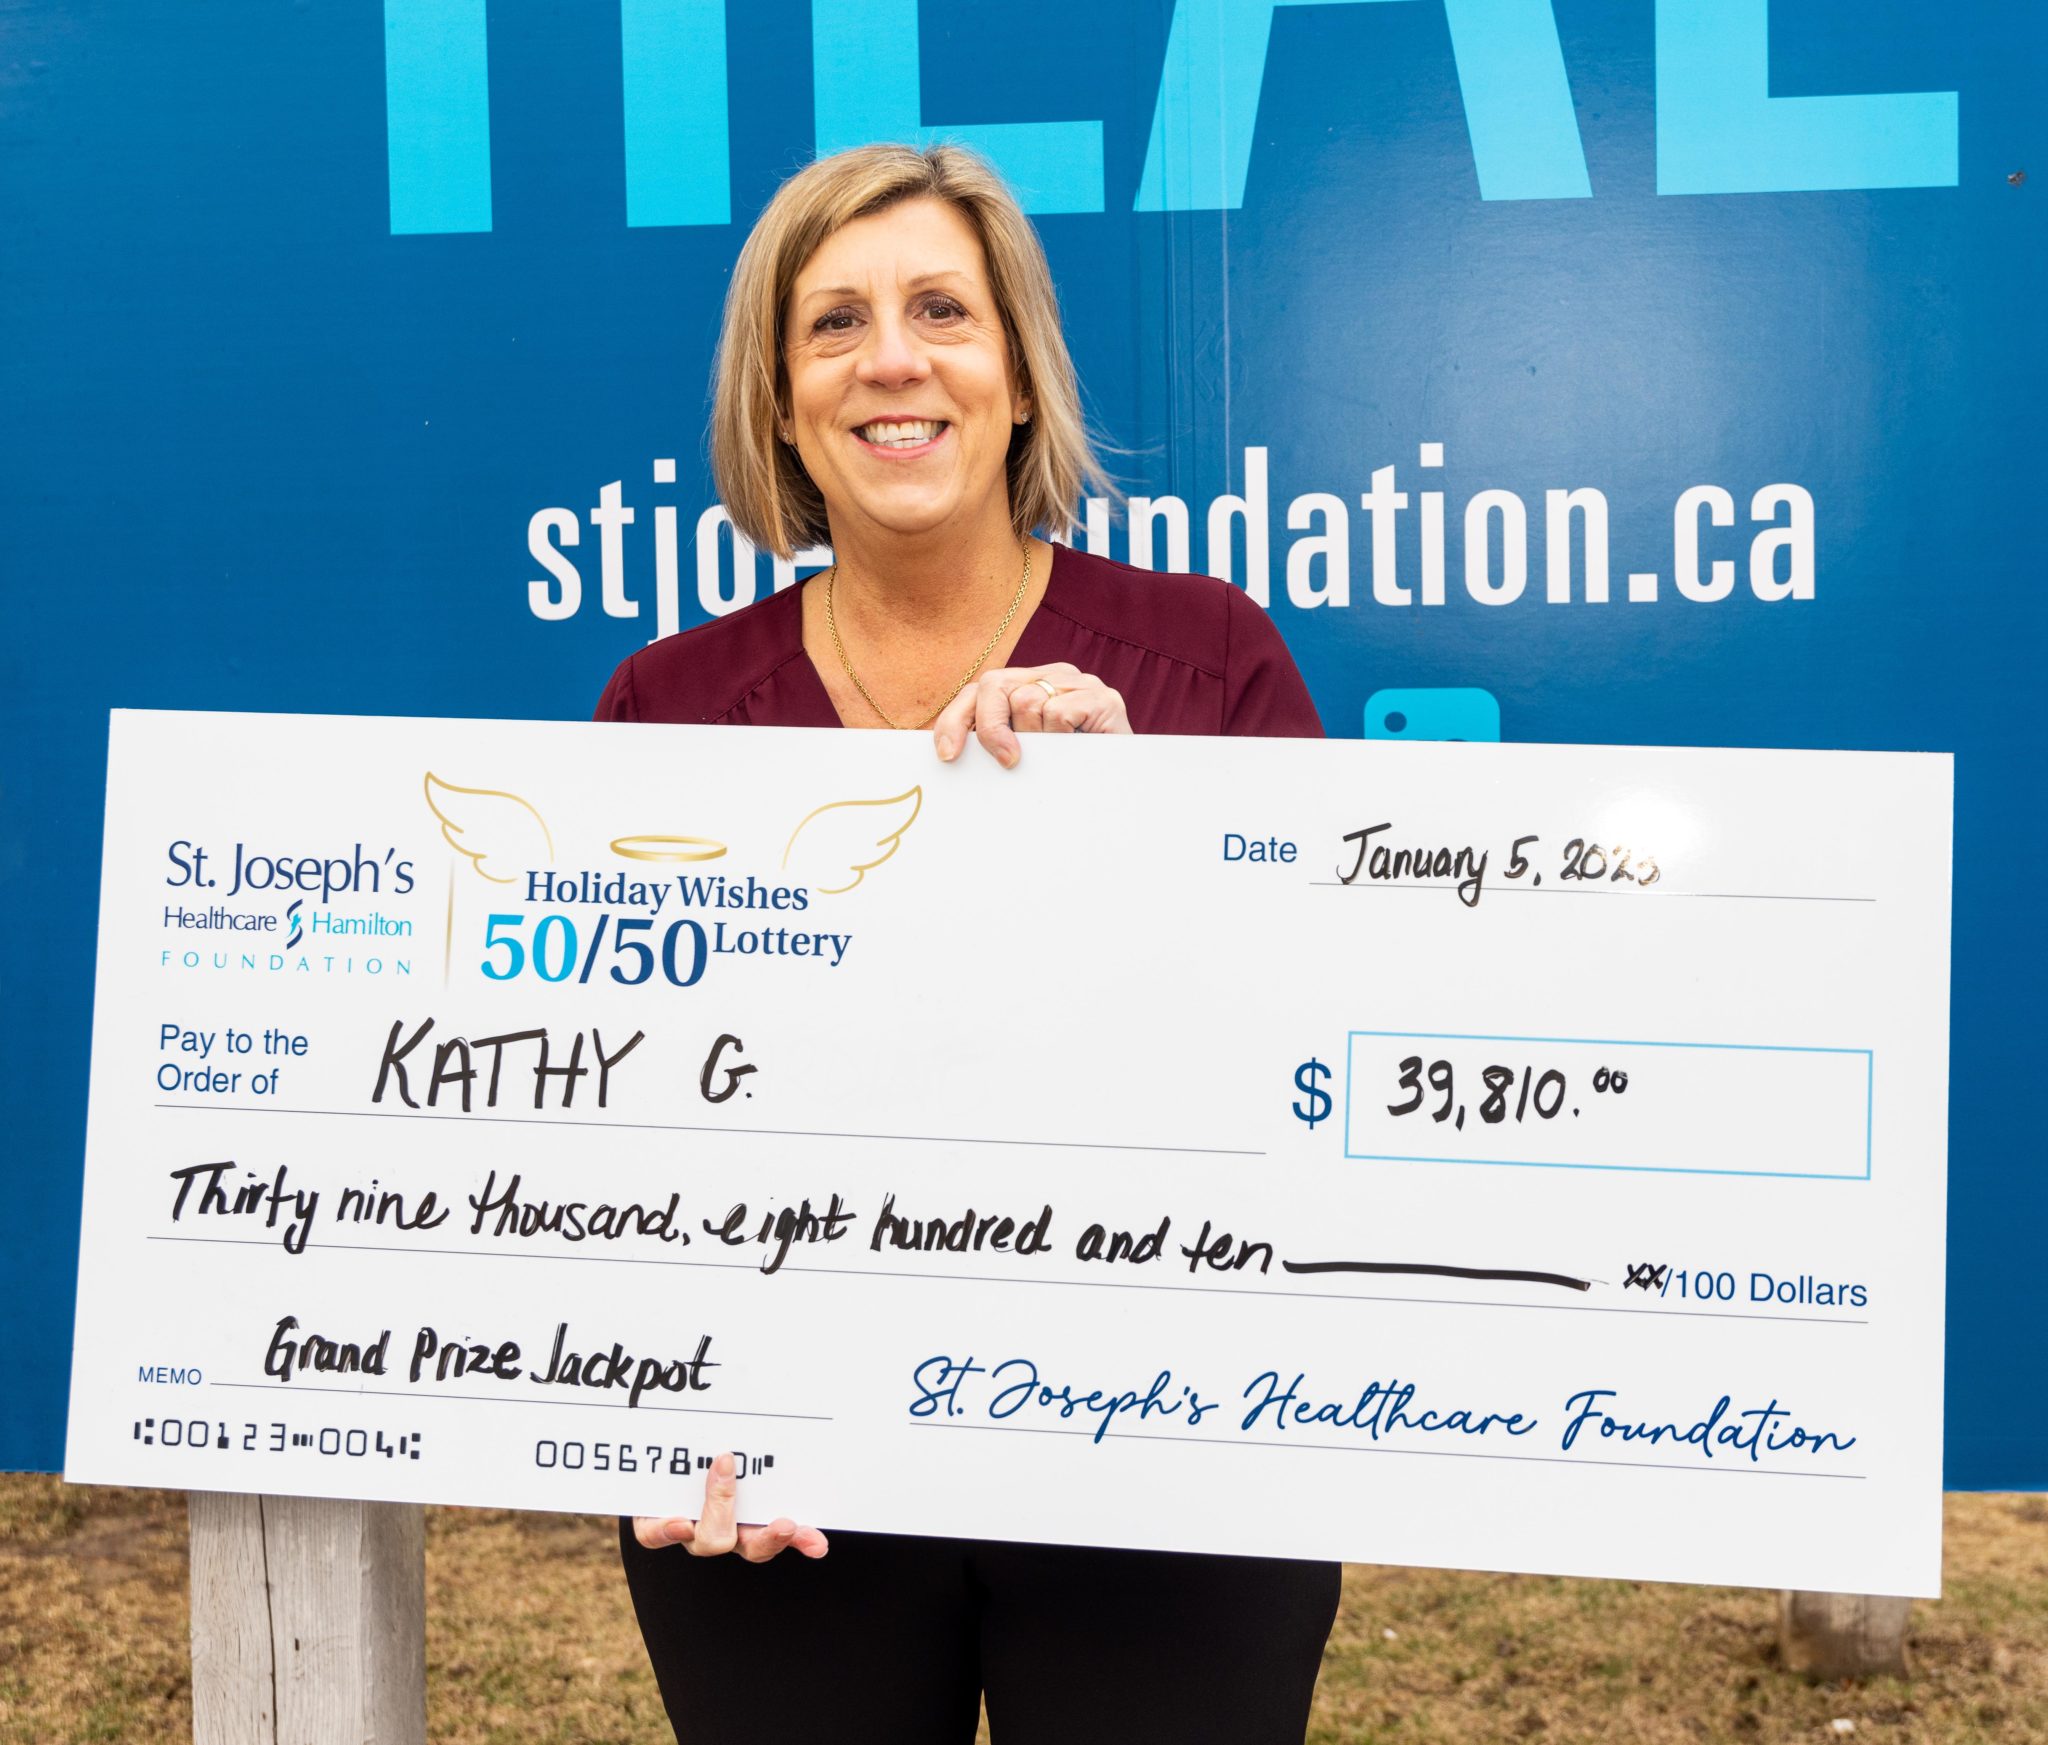 Holiday Wishes Lottery Winner, Kathy G., smiles while holding an oversized novelty cheque with her name on it for $39,810.00